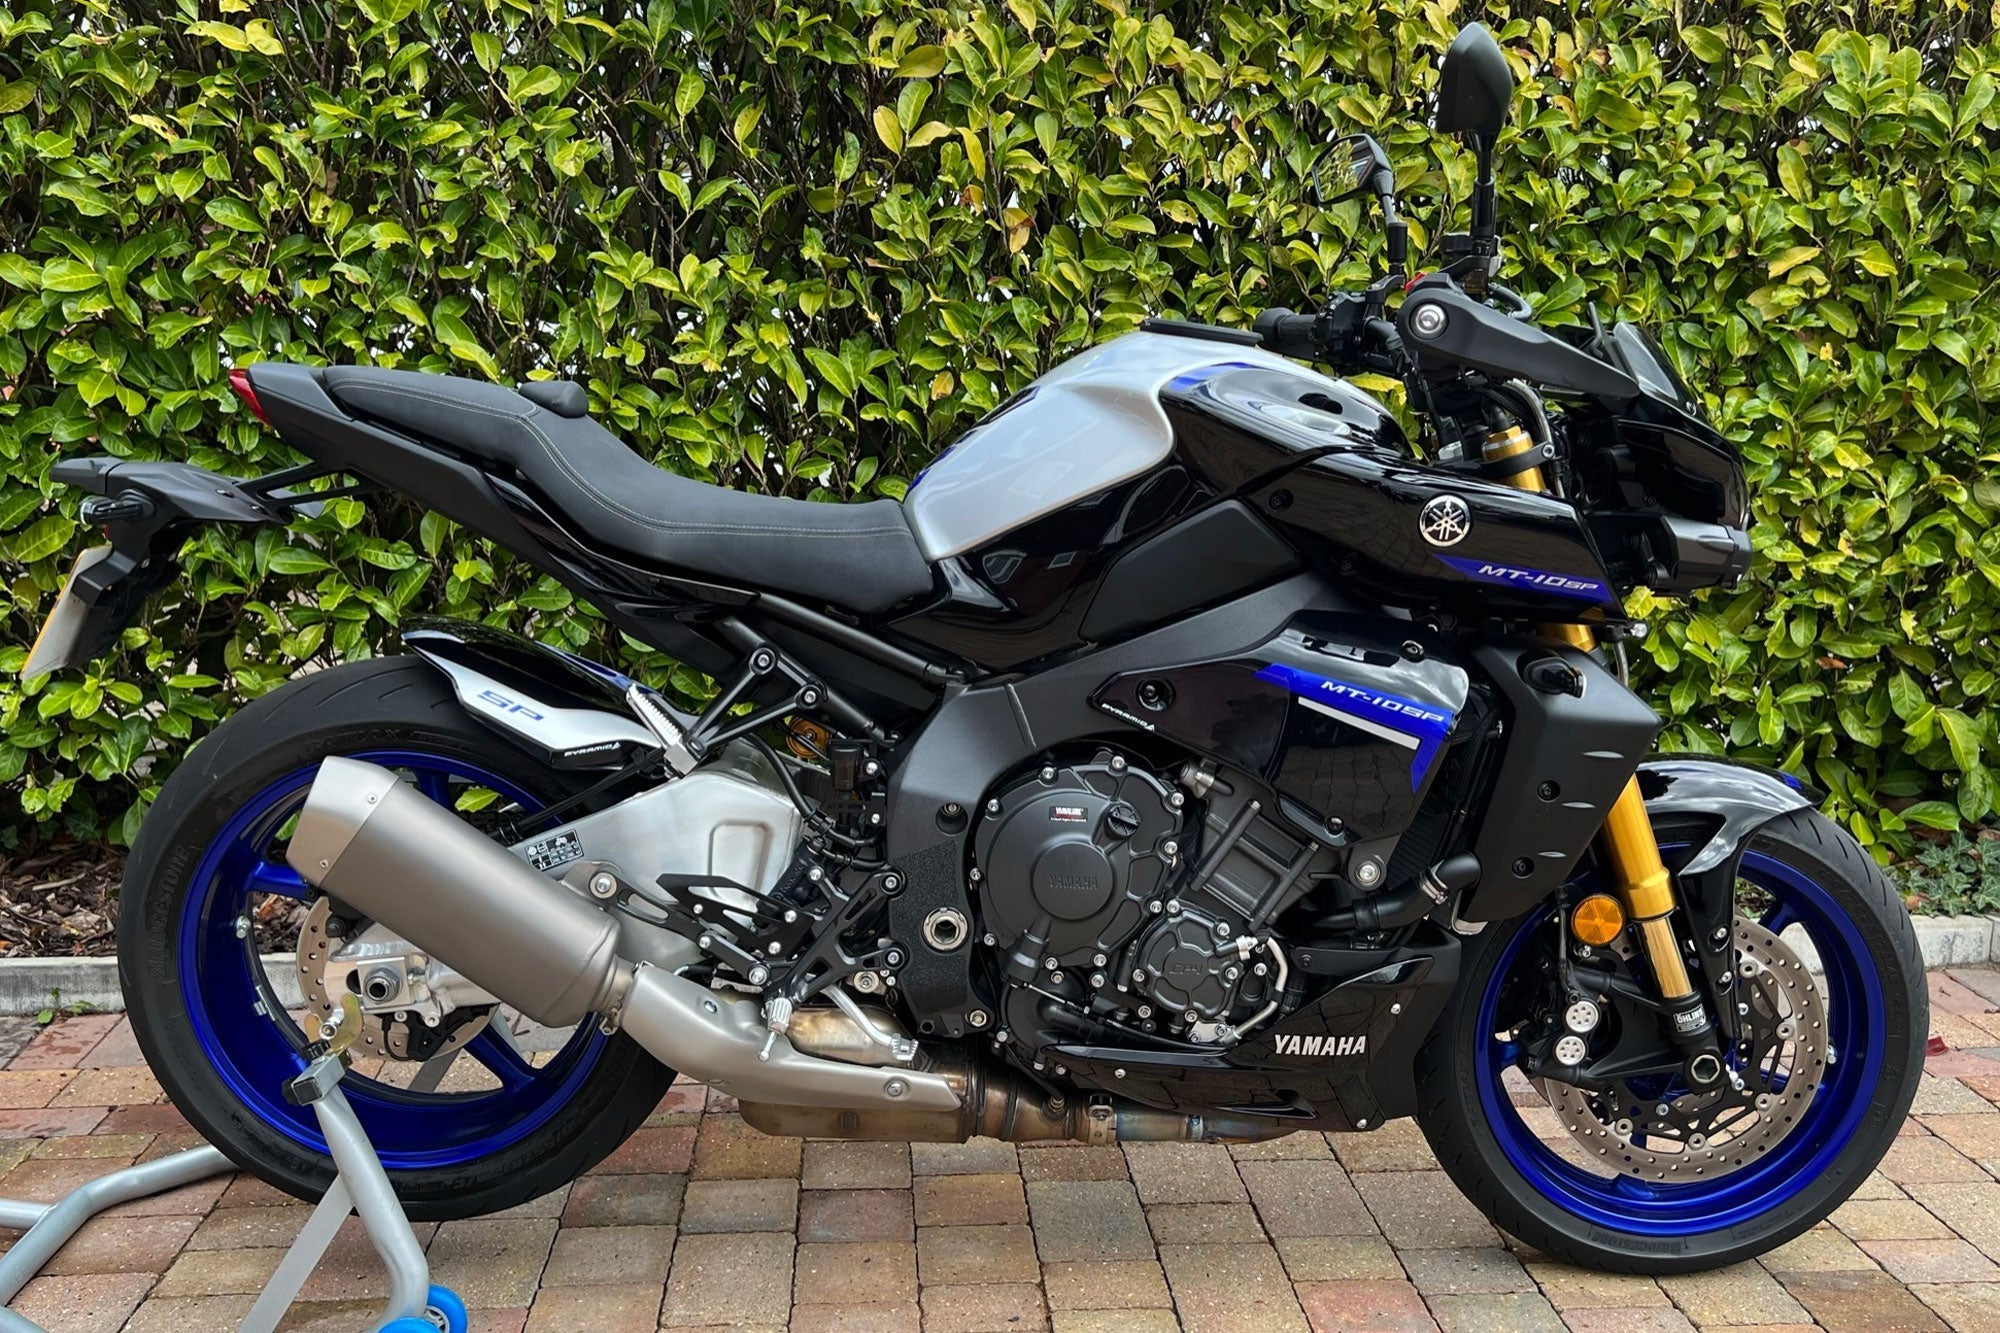 Pyramid Infill Panels | SP Colours | Yamaha MT-10 SP 2022>-22195G-Infill Panels-Pyramid Motorcycle Accessories